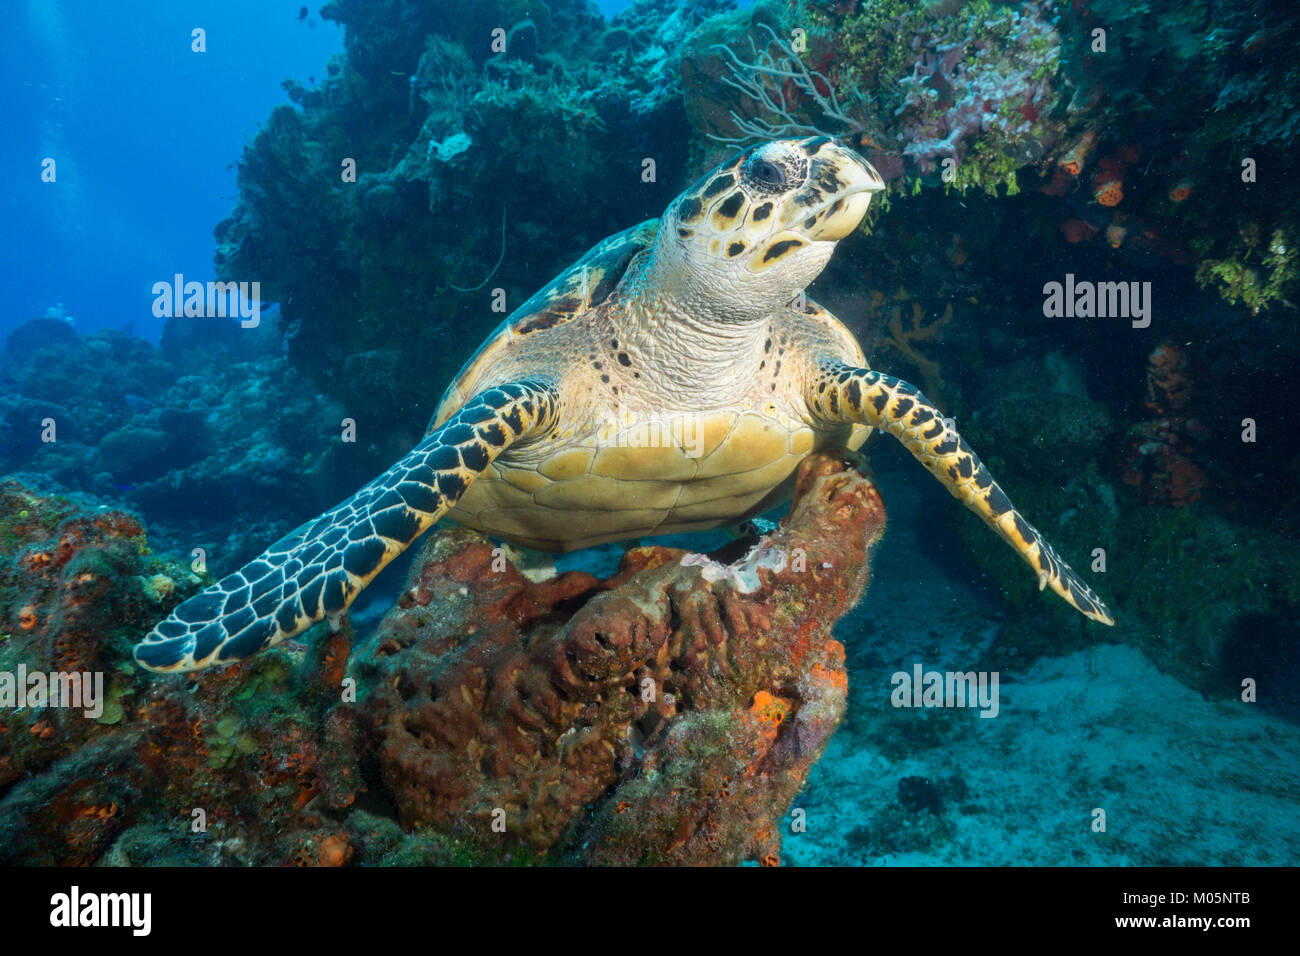 Perched Hawksbill Turtle Stock Photo